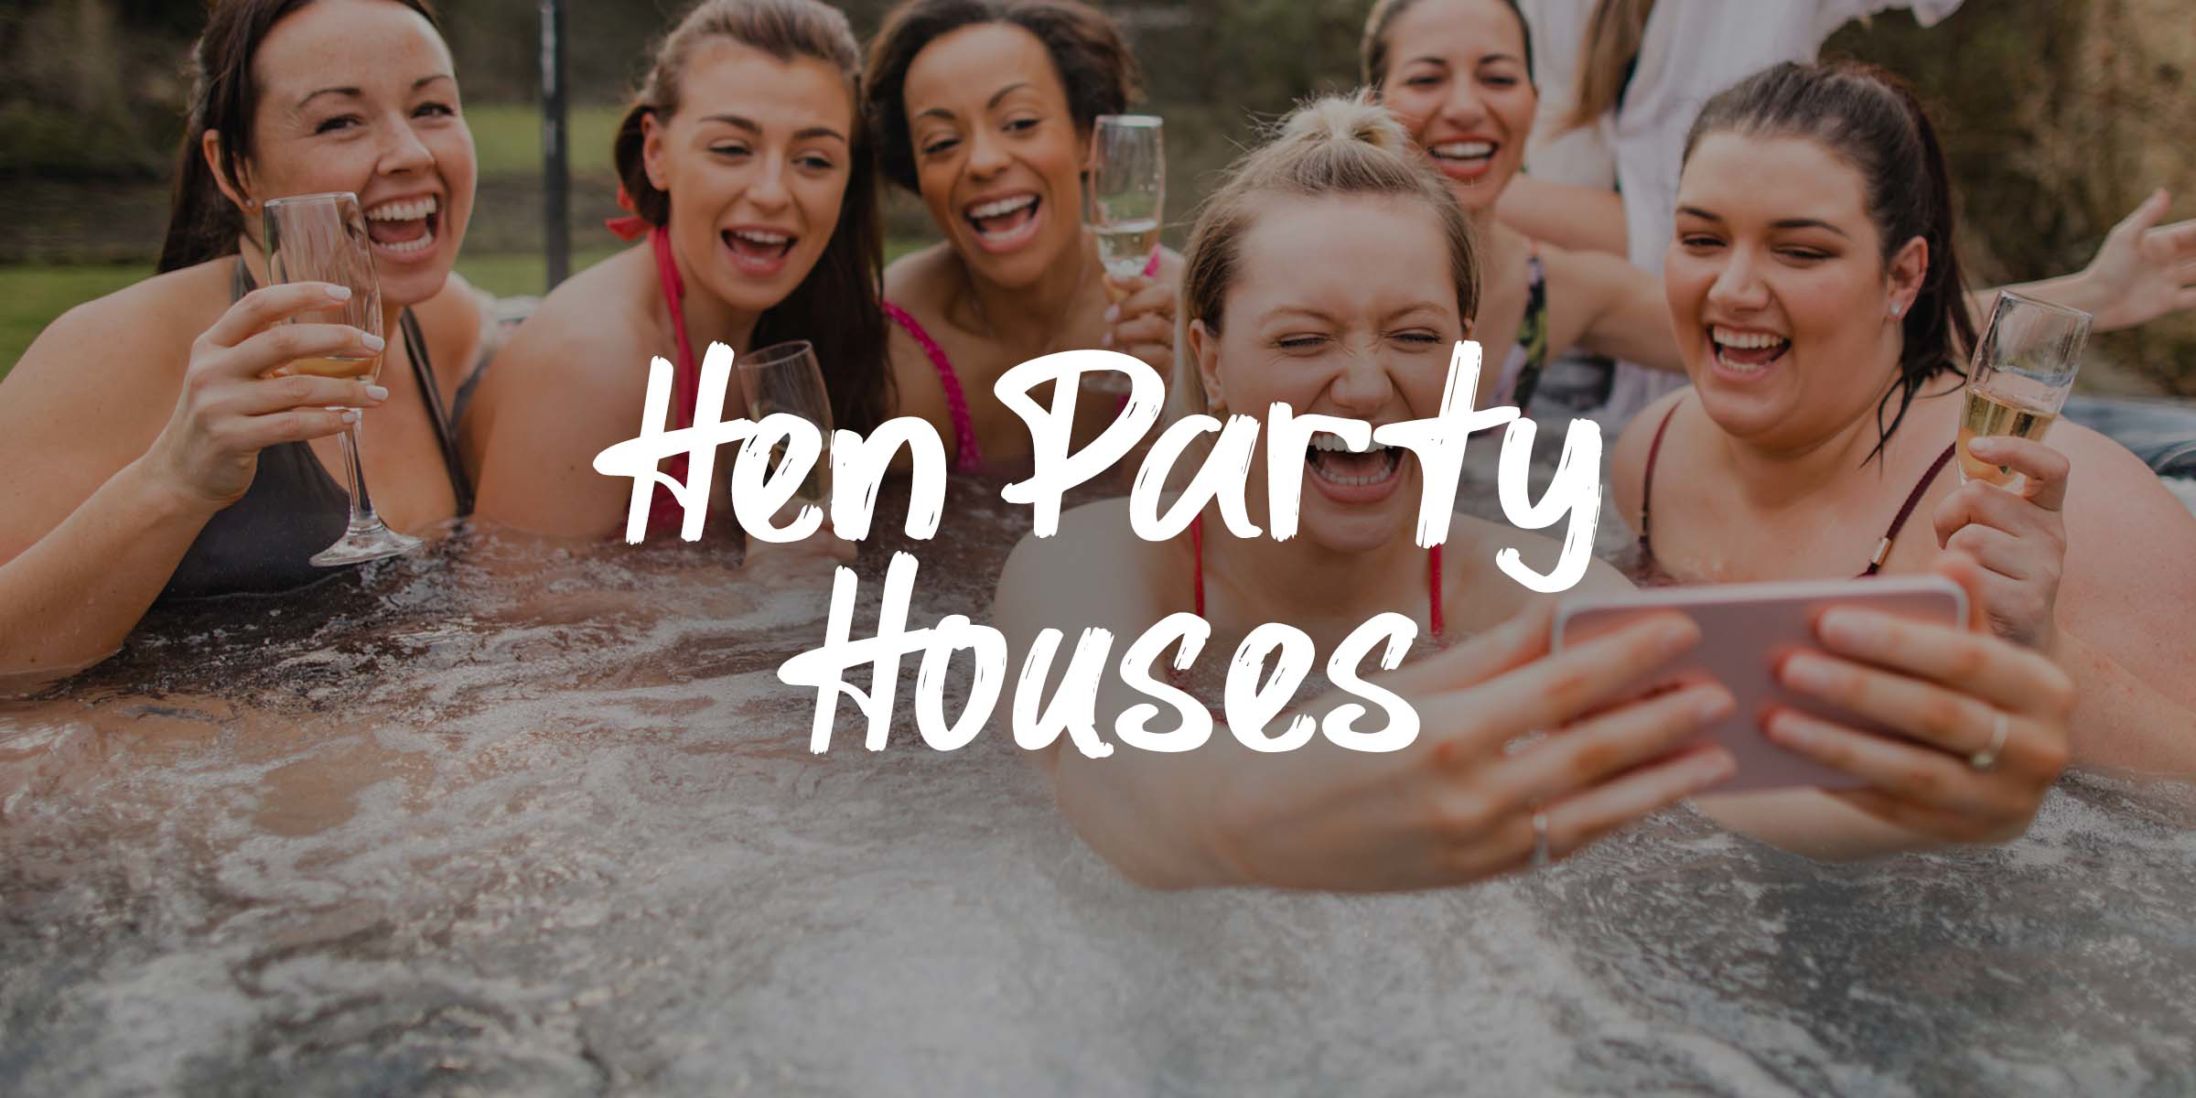 Hen Party Houses